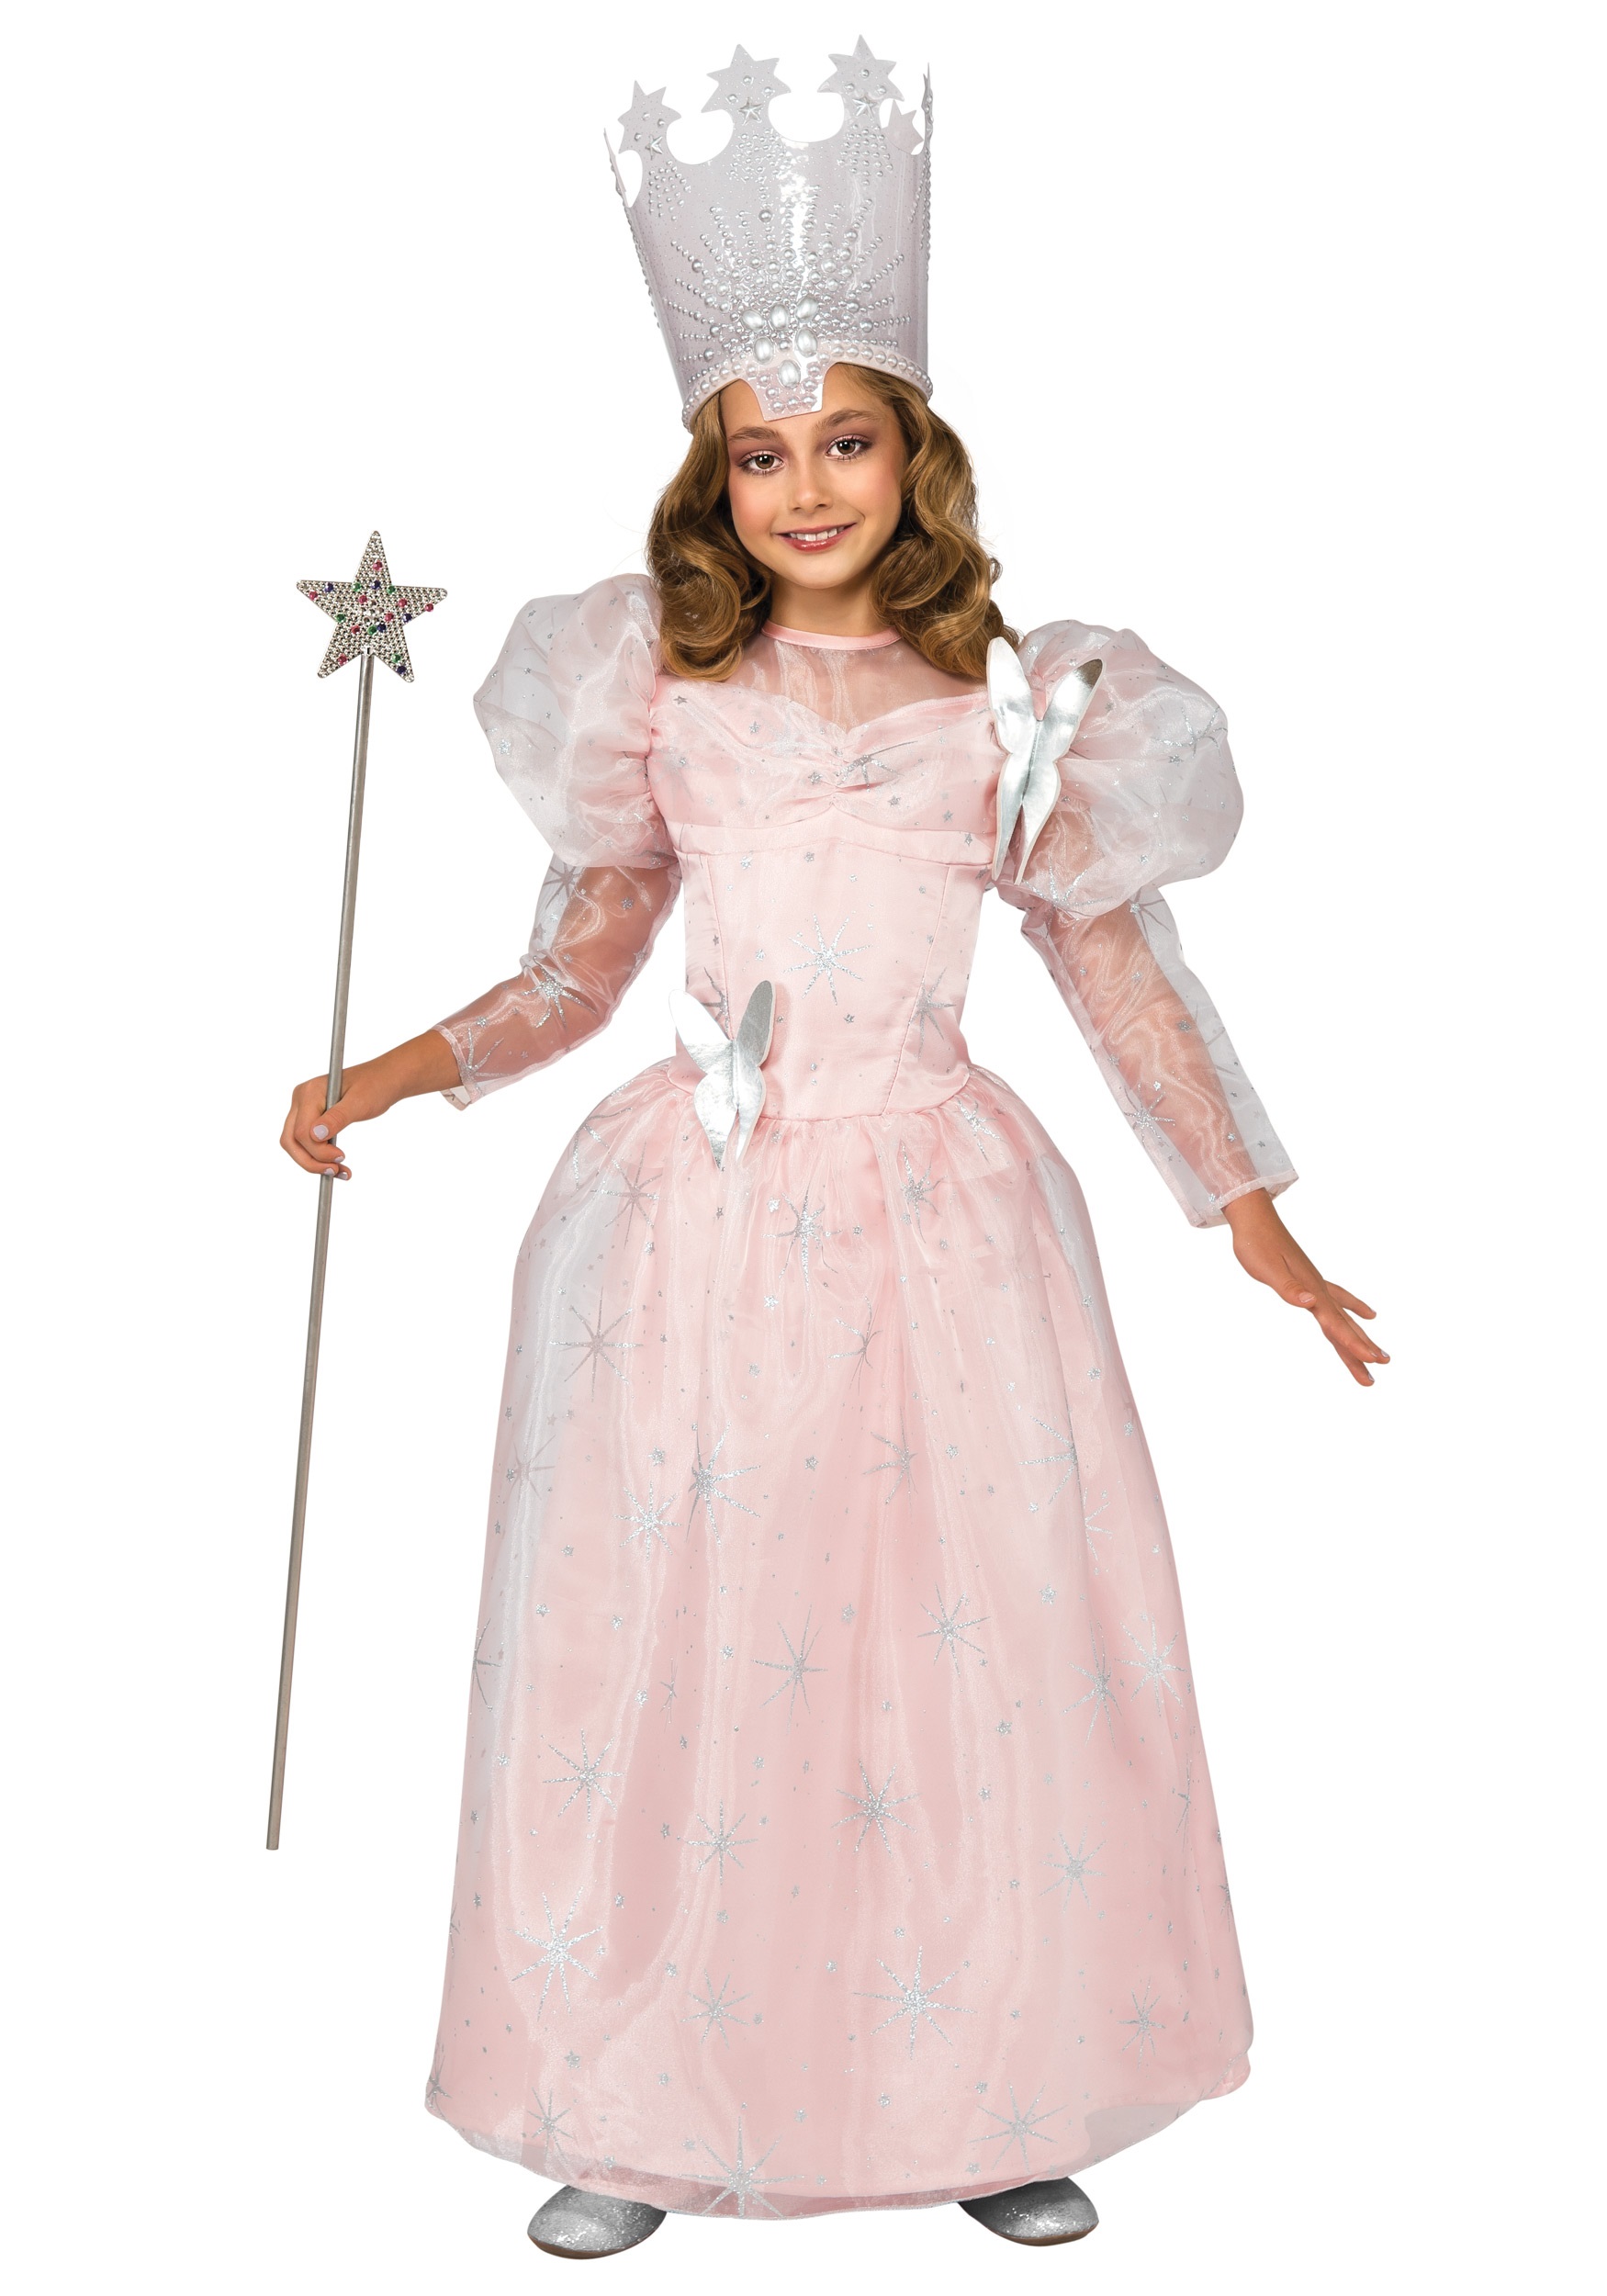 Photos - Fancy Dress Rubies Costume Co. Inc Kids Deluxe Glinda the Good Witch Costume | Wizard 